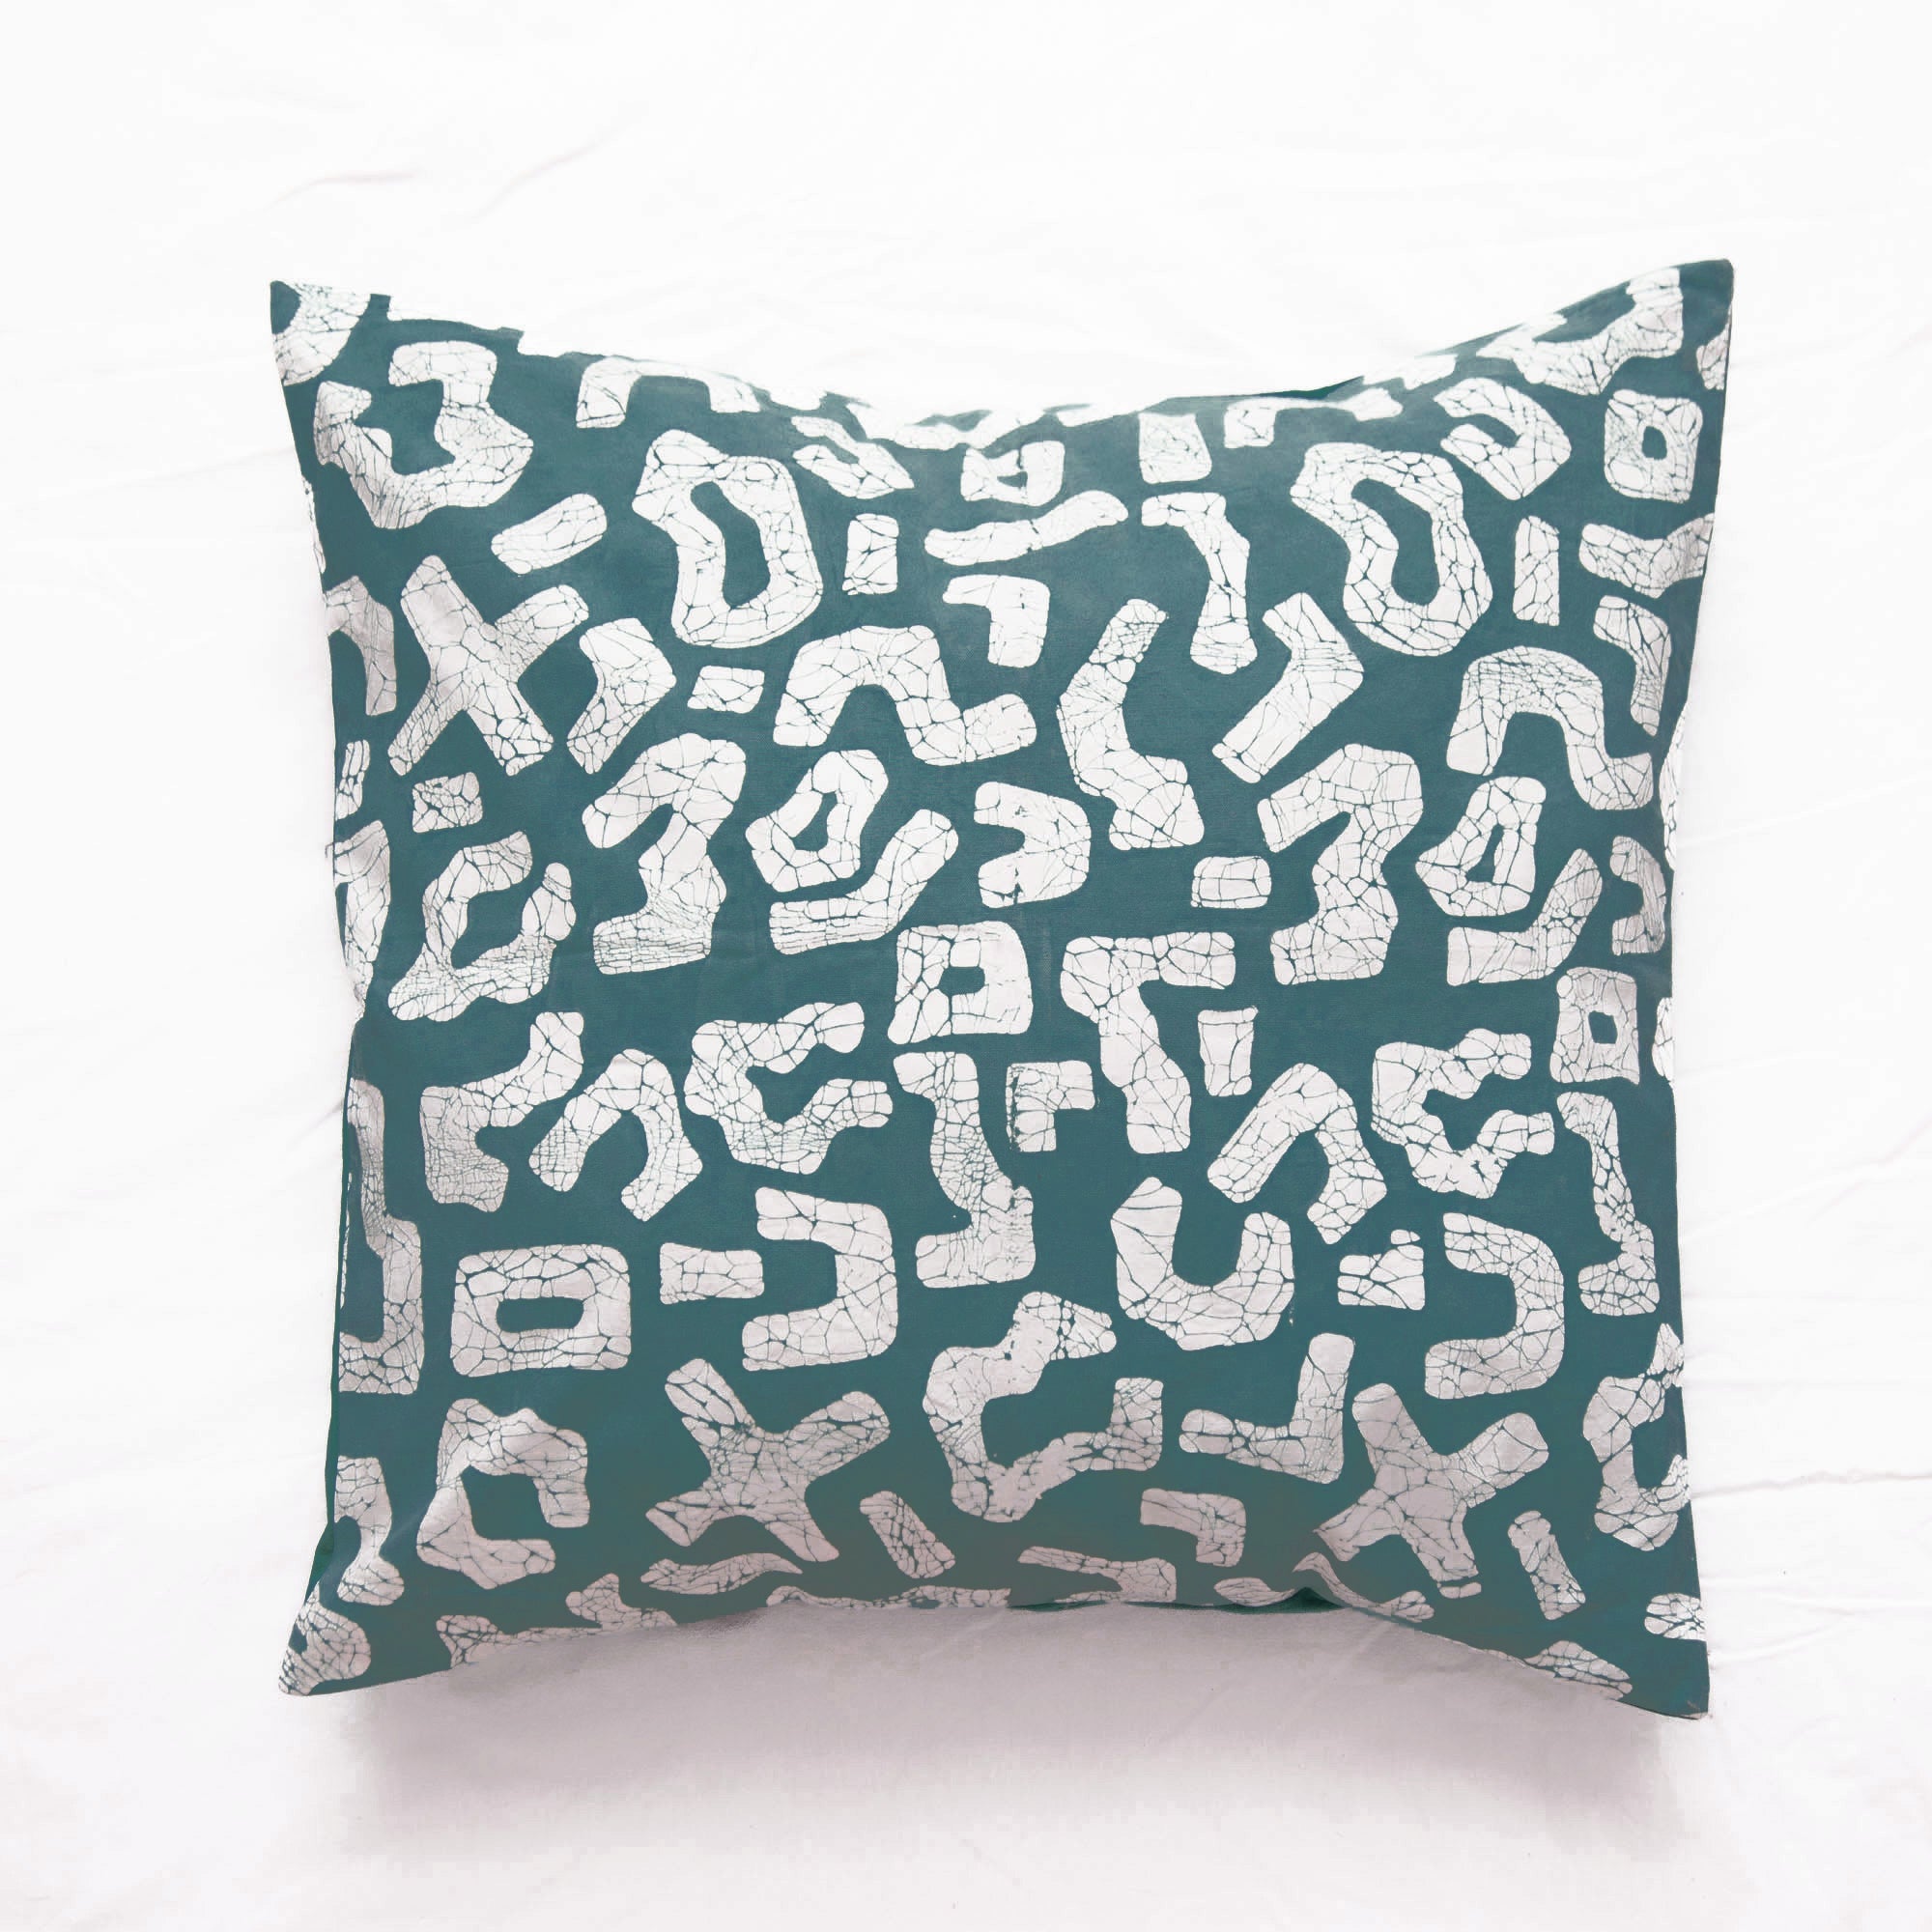 Kuba Blues Filled Teal Cushion Cover - Handmade by TRIBAL TEXTILES - Handcrafted Home Decor Interiors - African Made